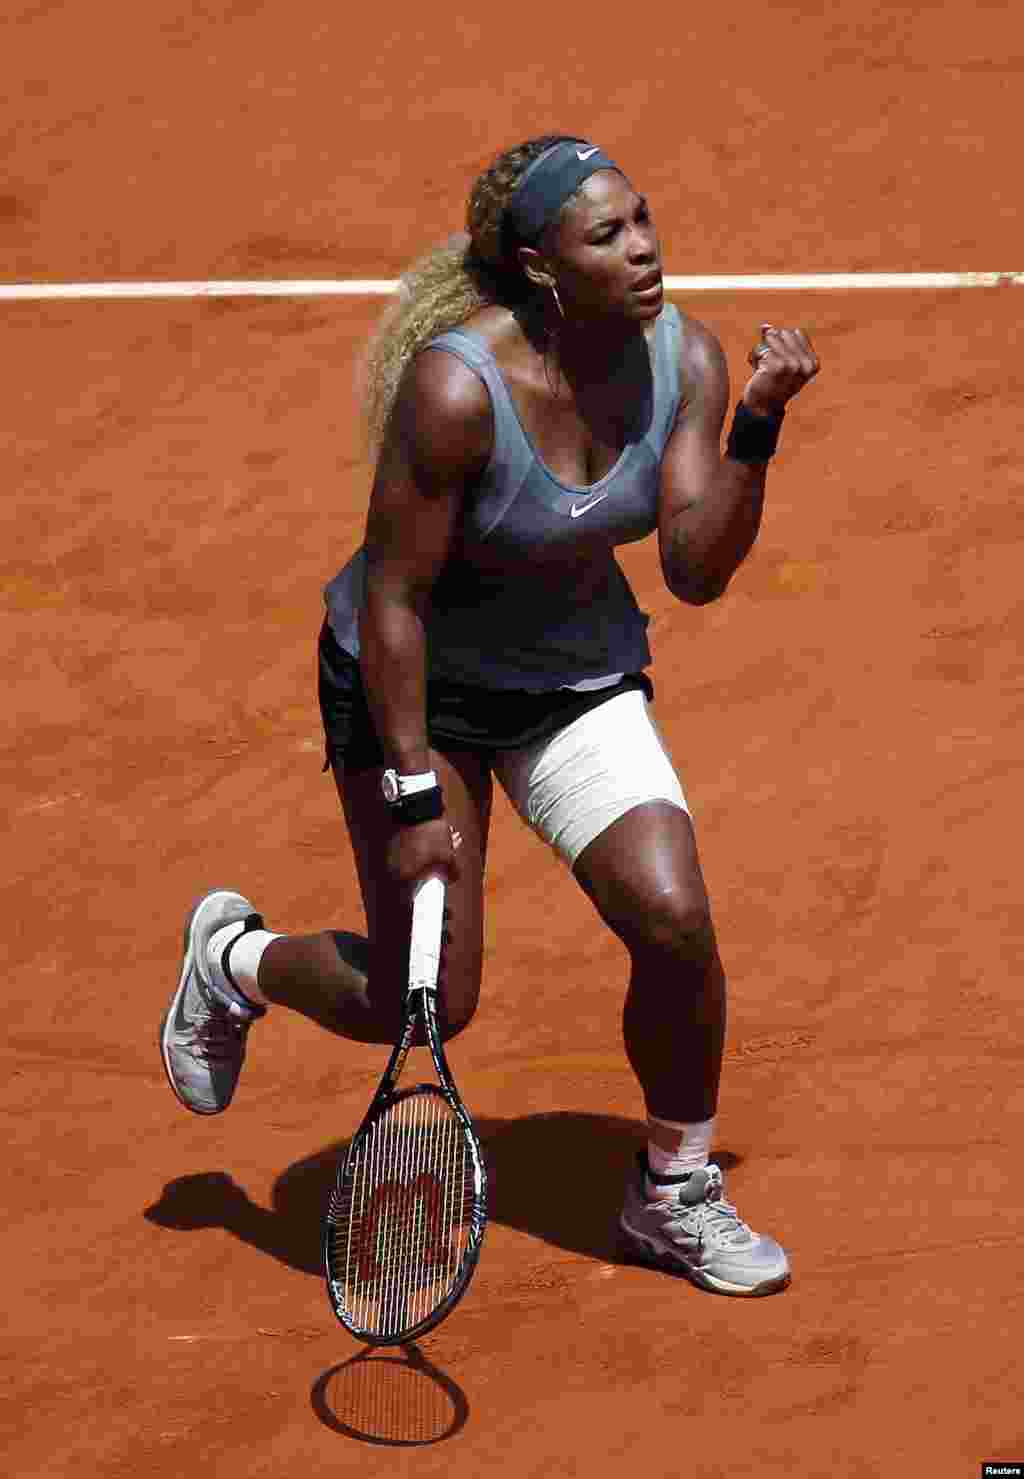 Serena Williams of the U.S. celebrates winning a point during her match against Carla Suarez Navarro of Spain at the Madrid Open tennis tournament, Spain.